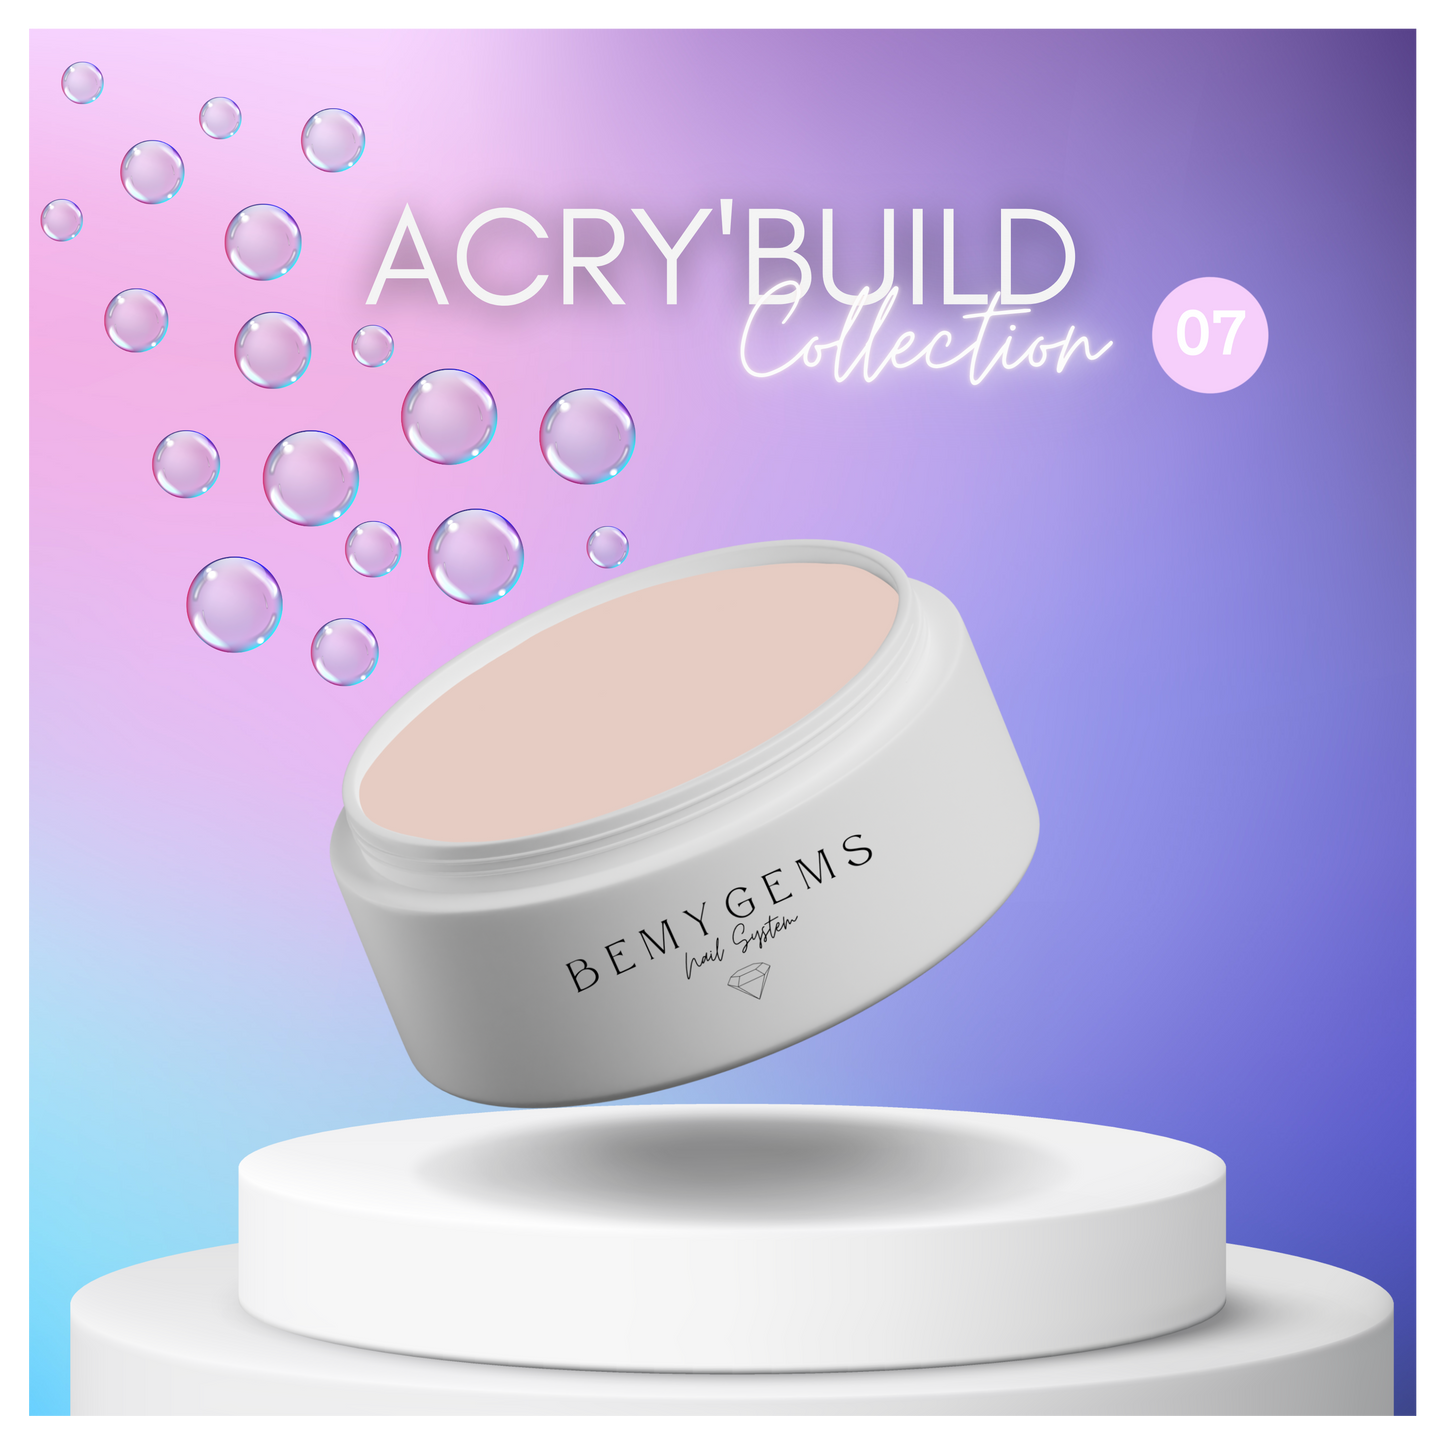 ACRY'BUILD 07 - Natural beige